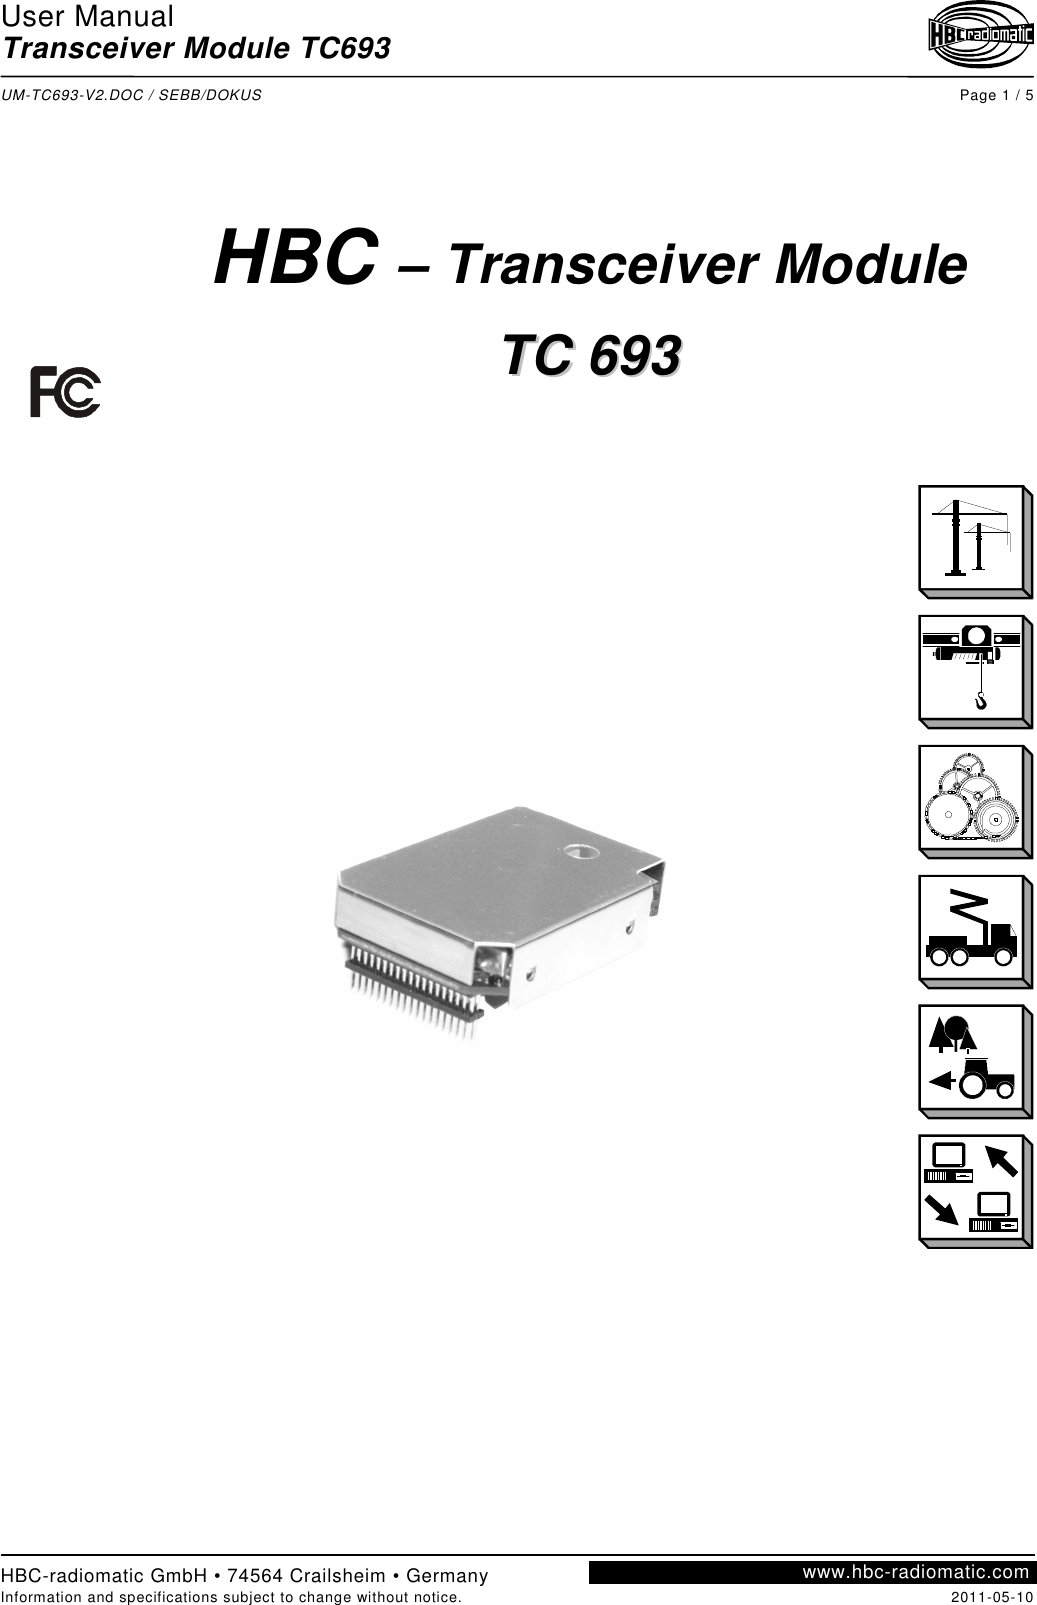 User Manual Transceiver Module TC693  UM-TC693-V2.DOC / SEBB/DOKUS  Page 1 / 5 HBC-radiomatic GmbH • 74564 Crailsheim • Germany Information and specifications subject to change without notice.  2011-05-10 www.hbc-radiomatic.com        HBC – Transceiver Module  TTCC  669933         